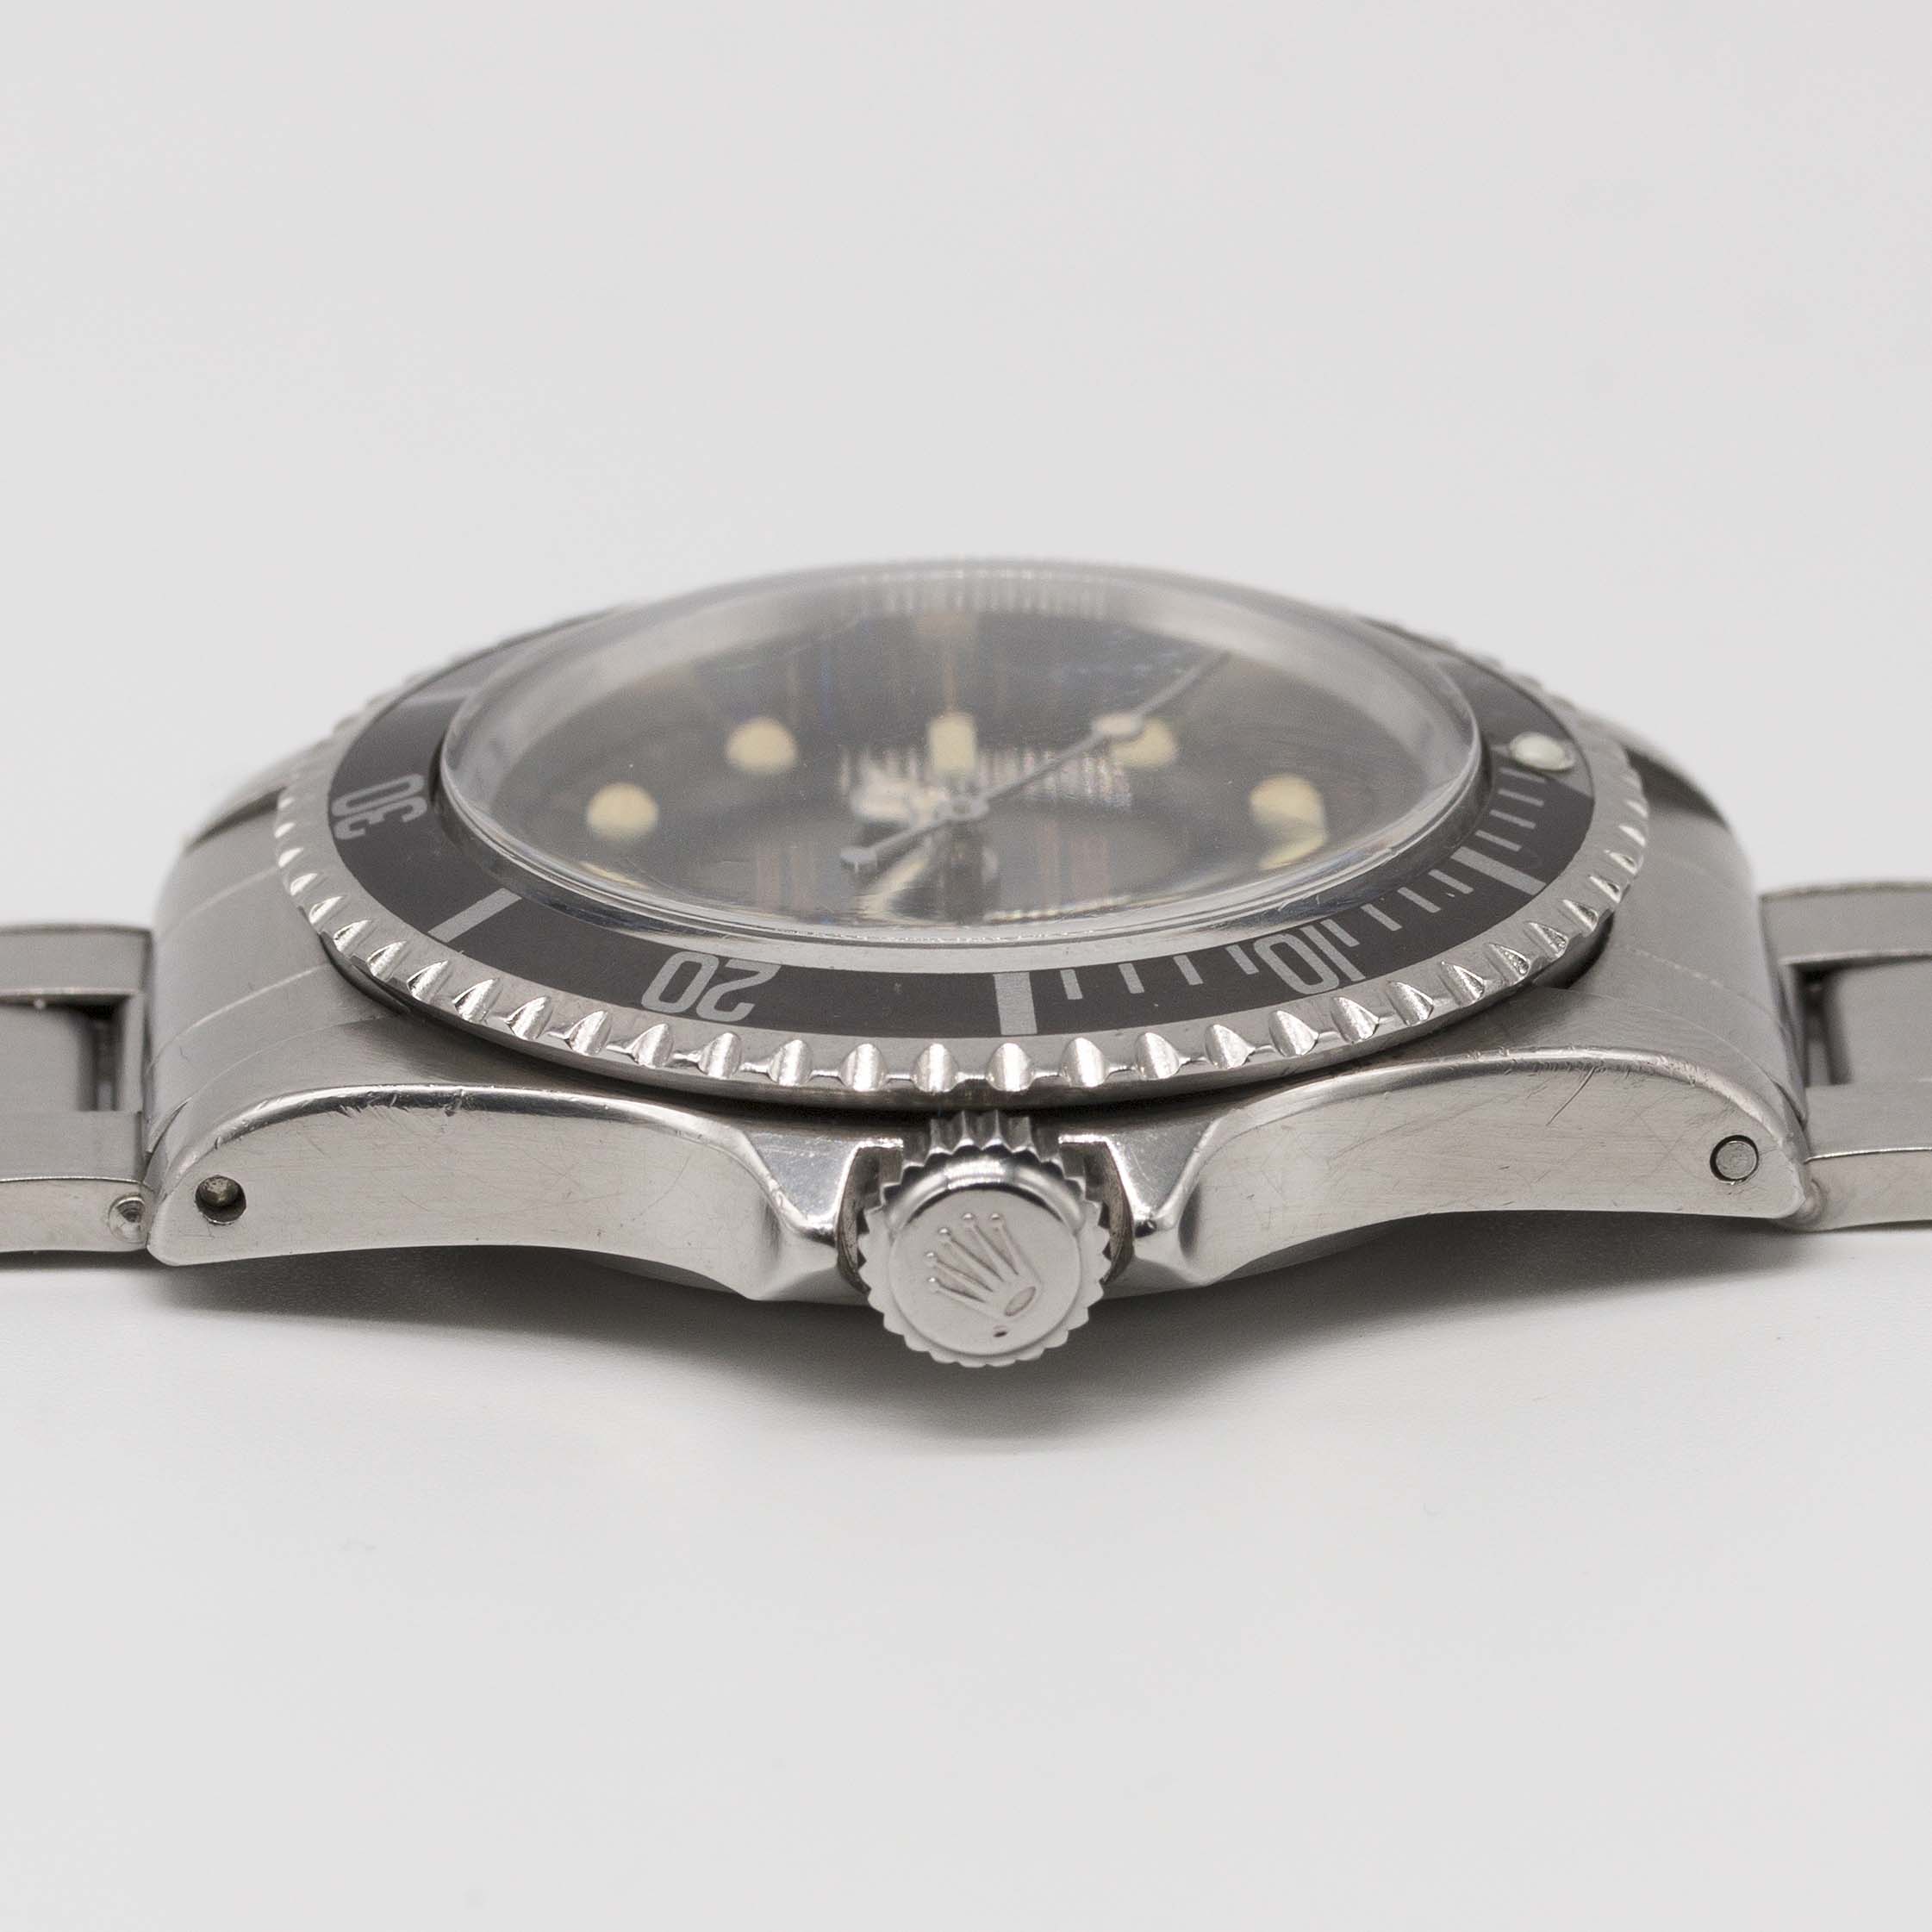 A VERY RARE GENTLEMAN'S STAINLESS STEEL ROLEX OYSTER PERPETUAL SUBMARINER BRACELET WATCH CIRCA 1964, - Image 13 of 17